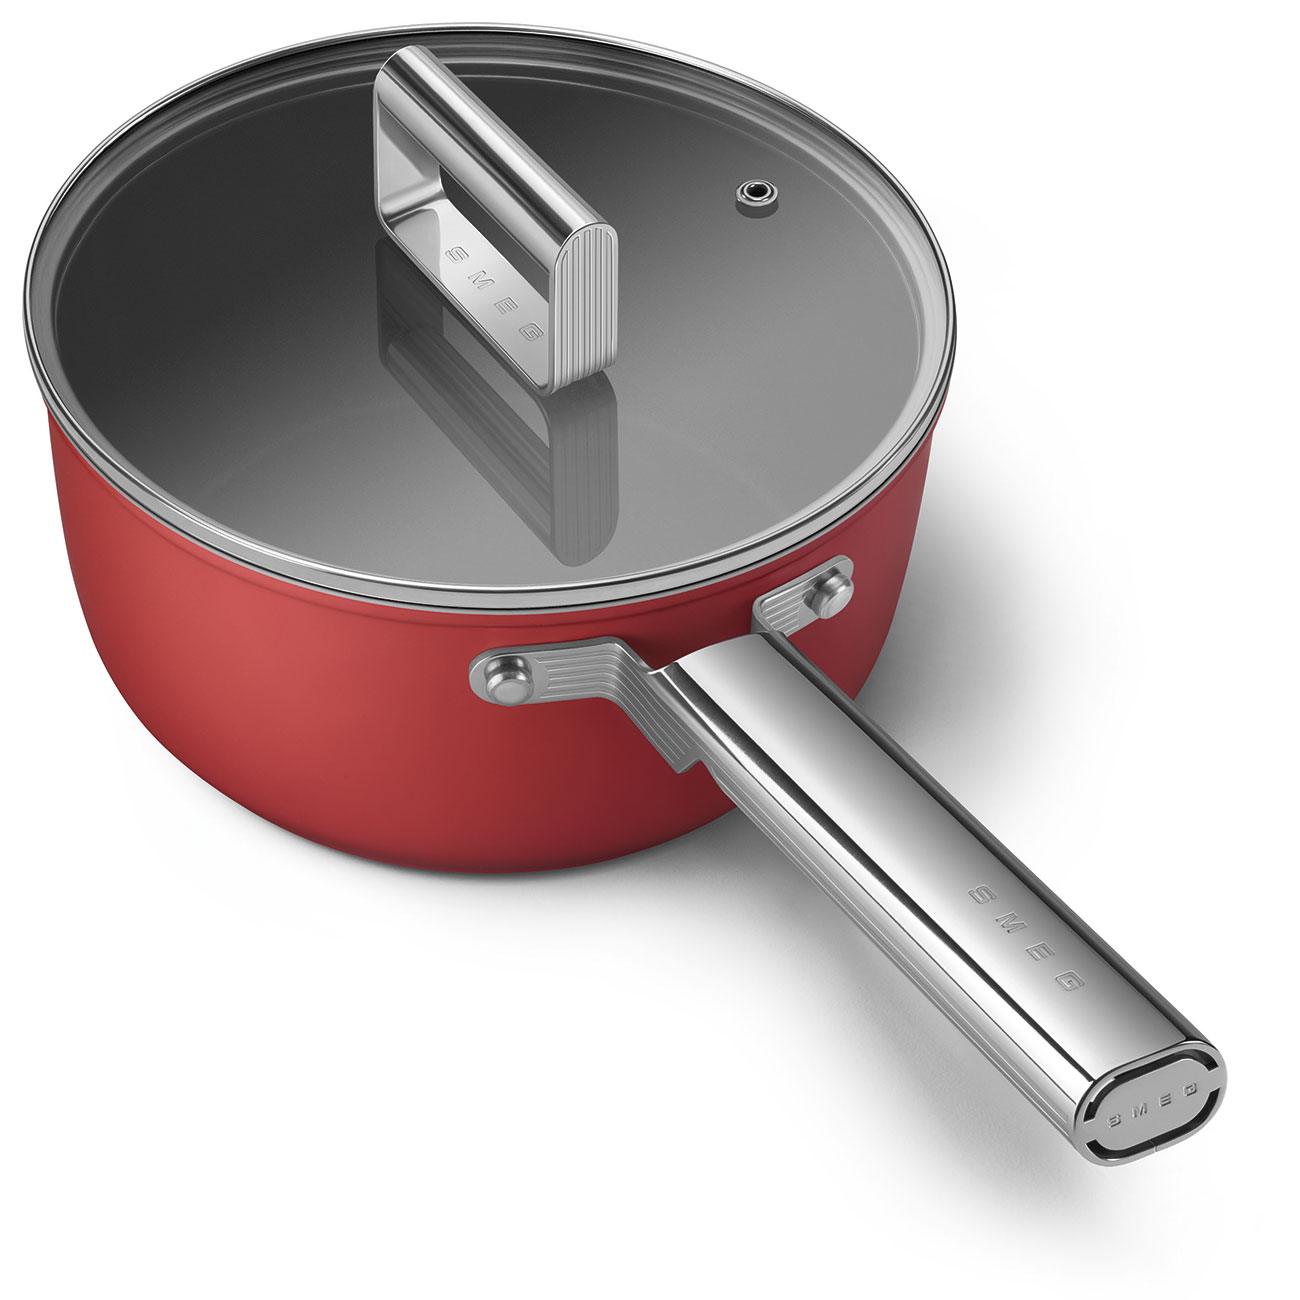 Smeg Red Non-stick Saucepan with glass lid and stainless steel handle_8